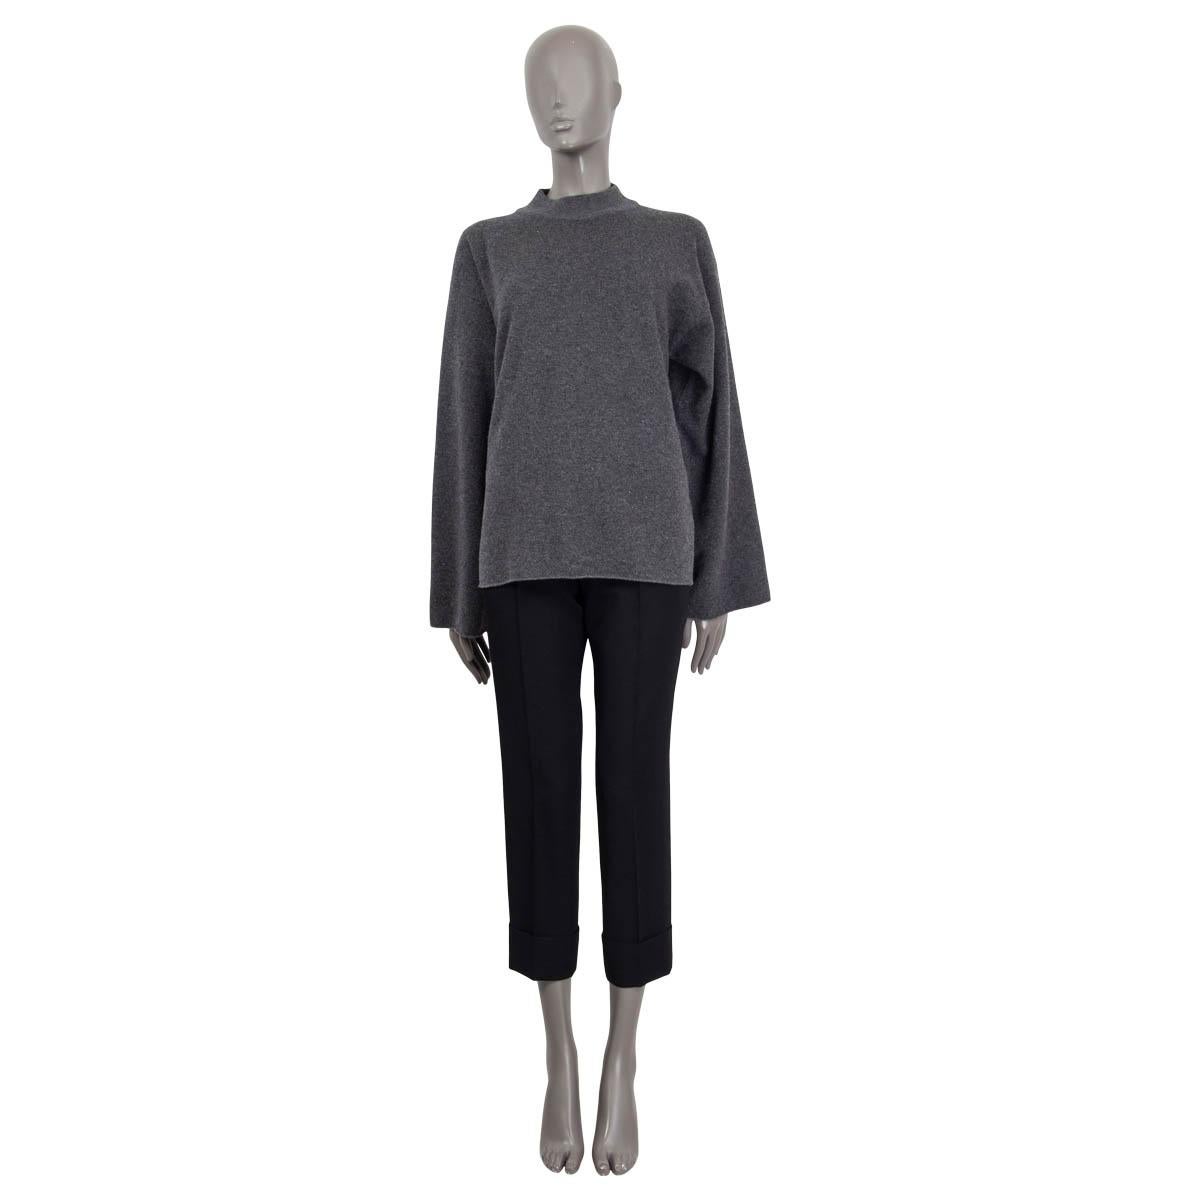 100% authentic The Row 'Daverio' long sleeve sweater in gray melange cashmere (84%) and silk (16%). Features a loose fit, a high neck and dropped sleeves that flare out. Unlined. Has been worn once and is in virtually new